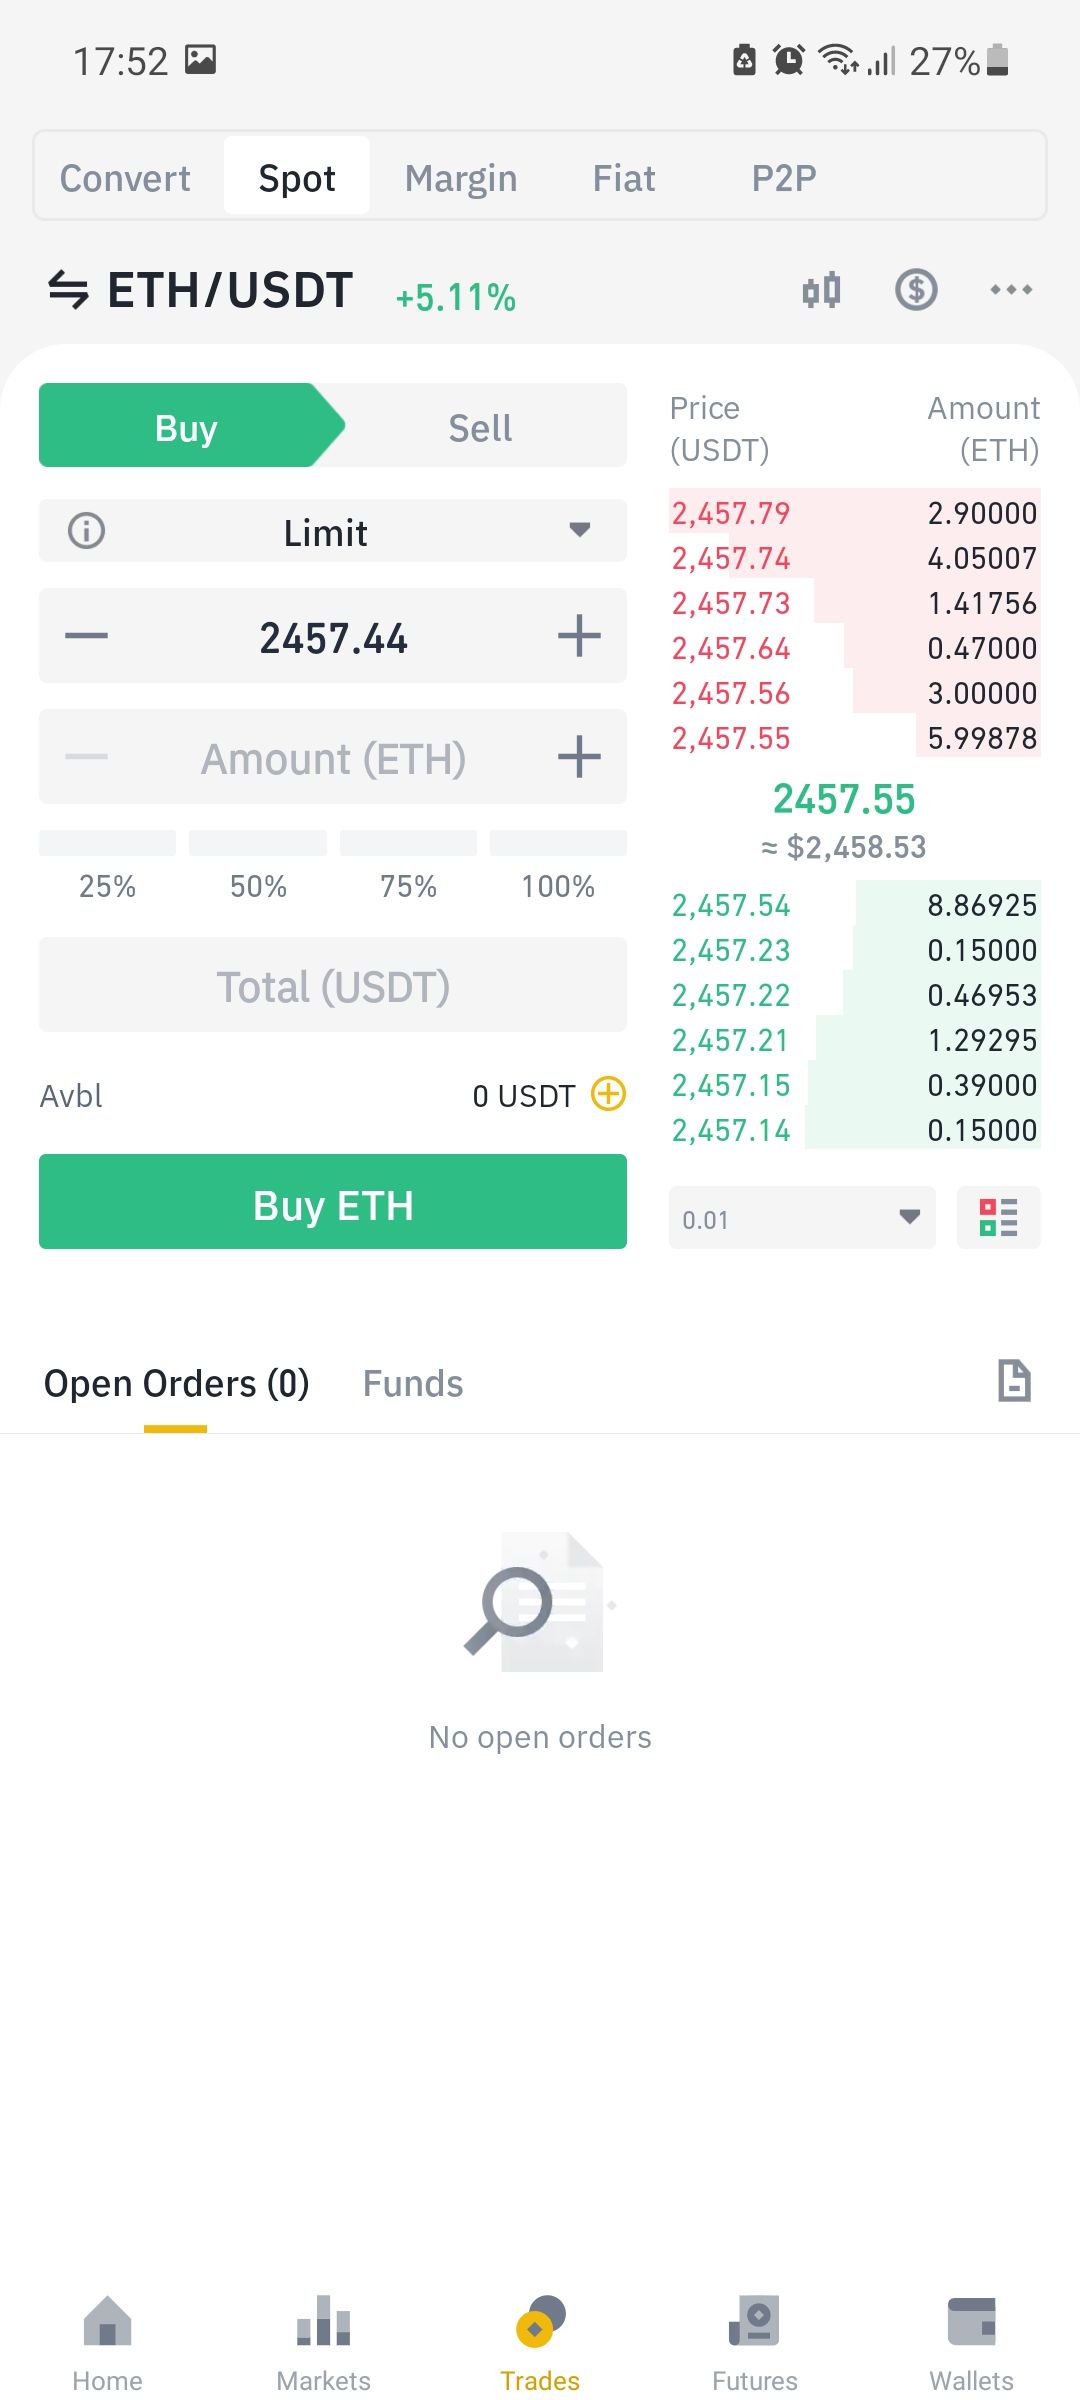 Binance for Android